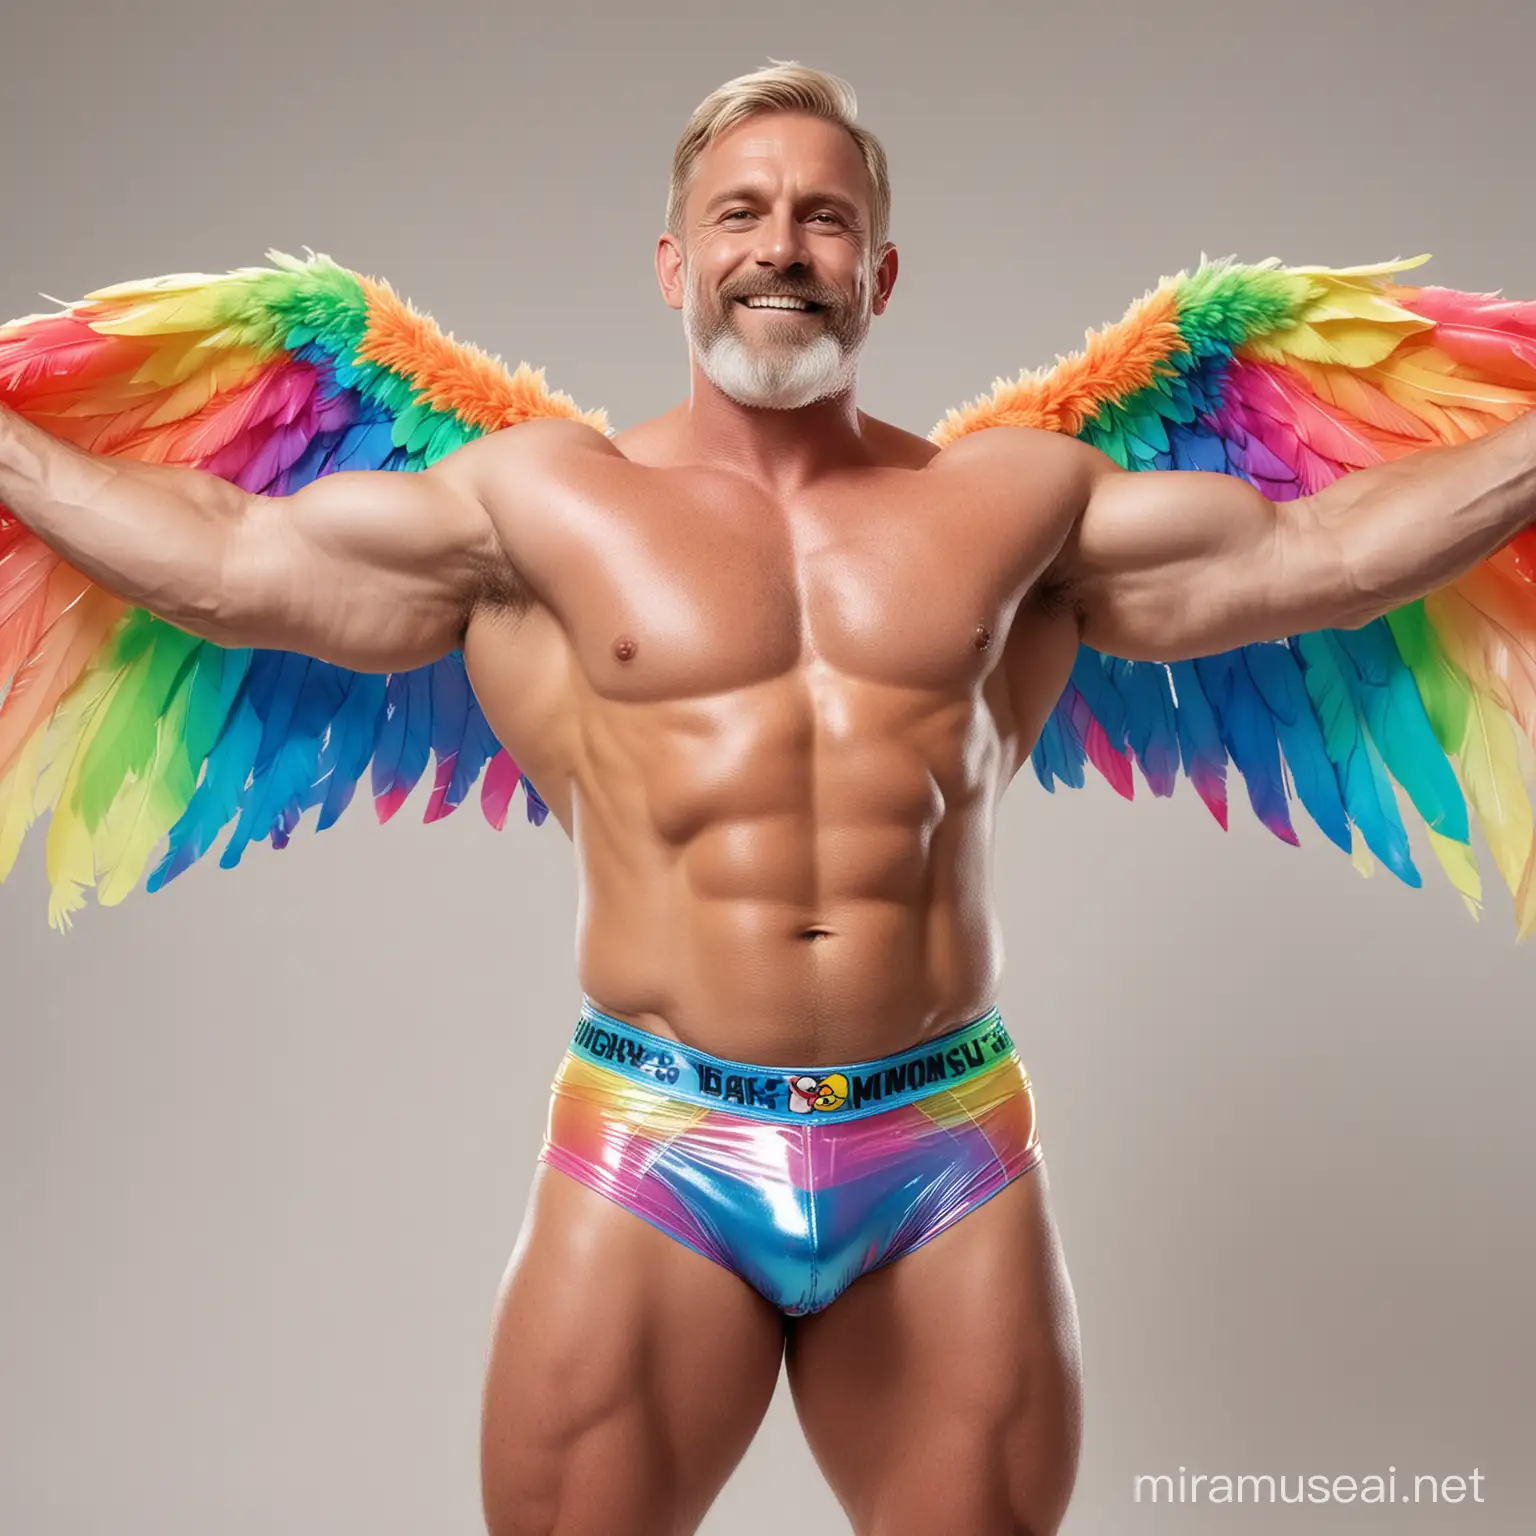 Muscular Bodybuilder Flexing Arm in Colorful Jacket with Eagle Wings and Doraemon